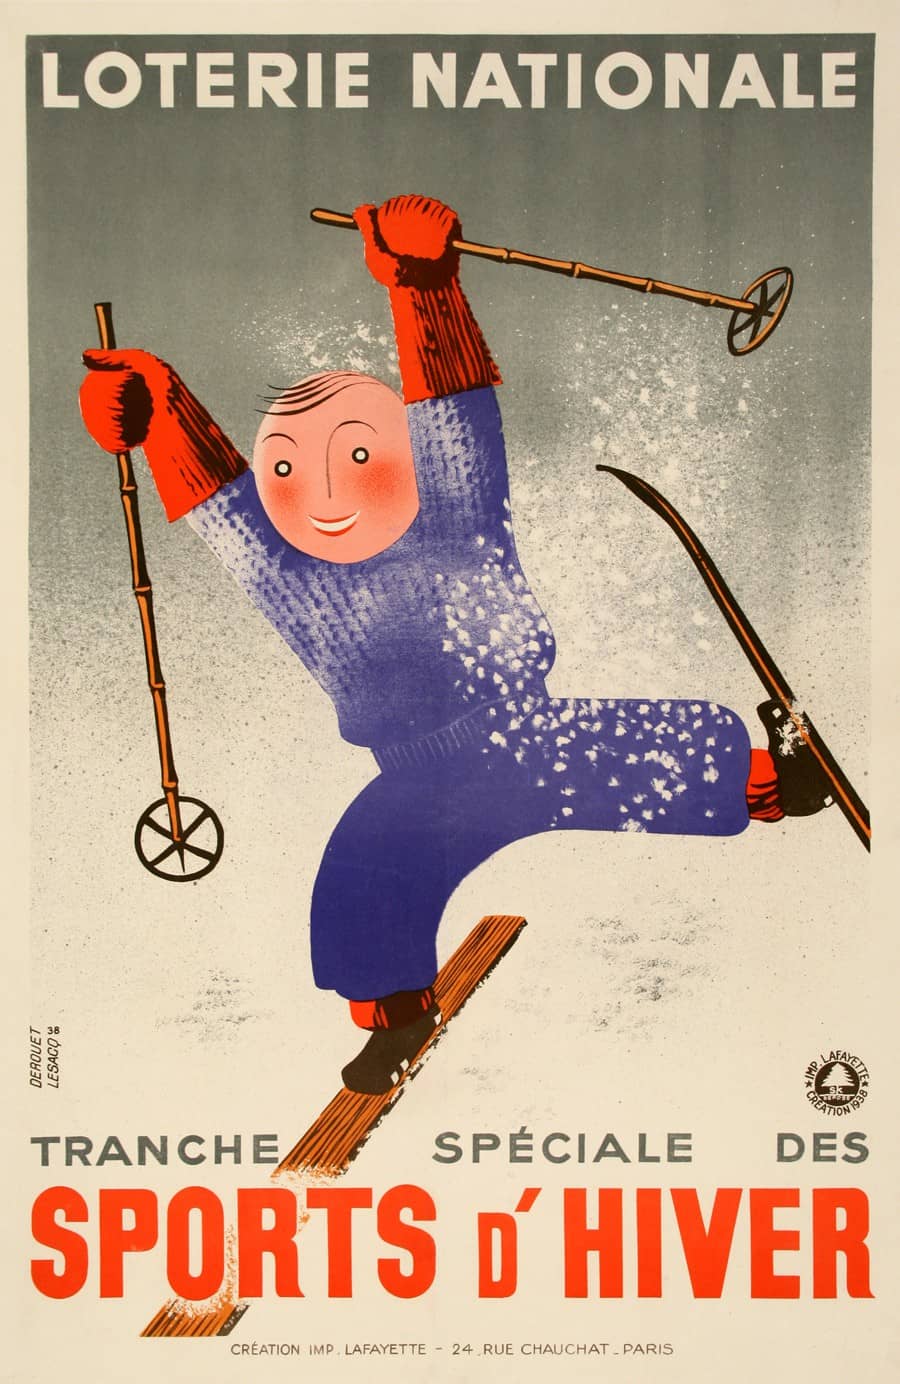 Loterie Nationale French Poster by Derouet Lesacq - Sports d'Hiver 1938